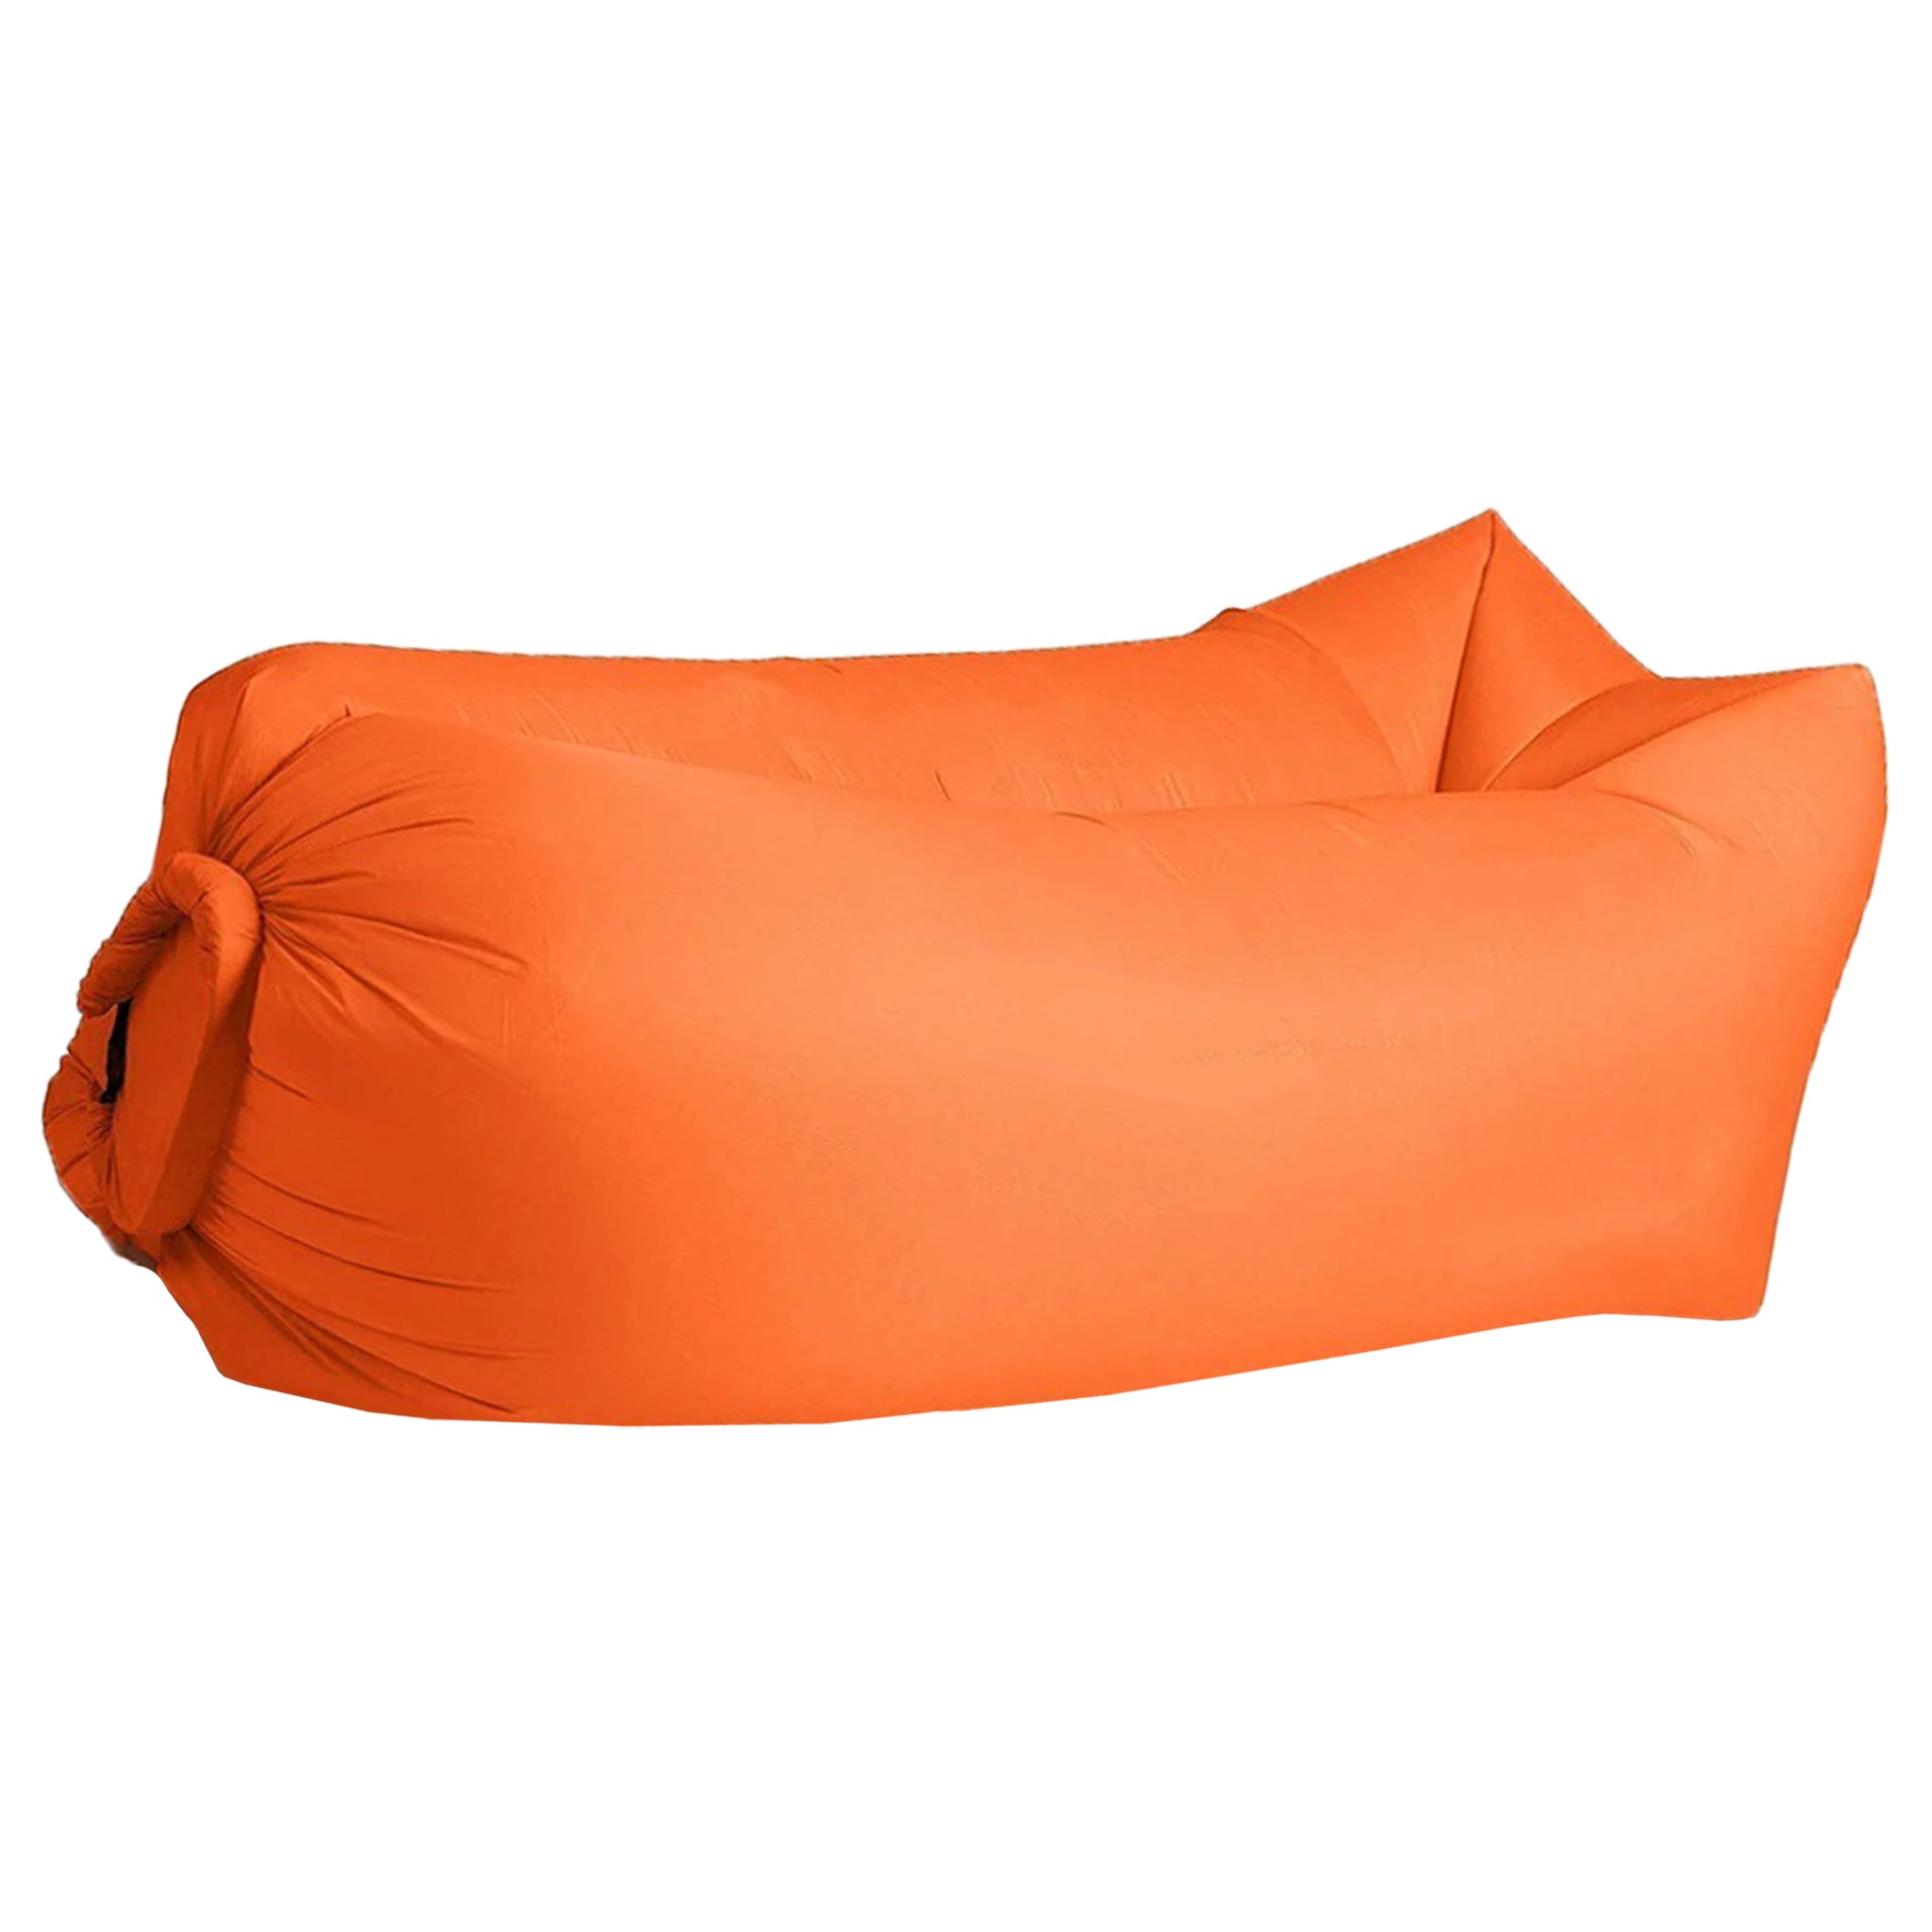 Kongur - Inflatable Sofa | camping accessories | sleeping bag | Inflatable lounger